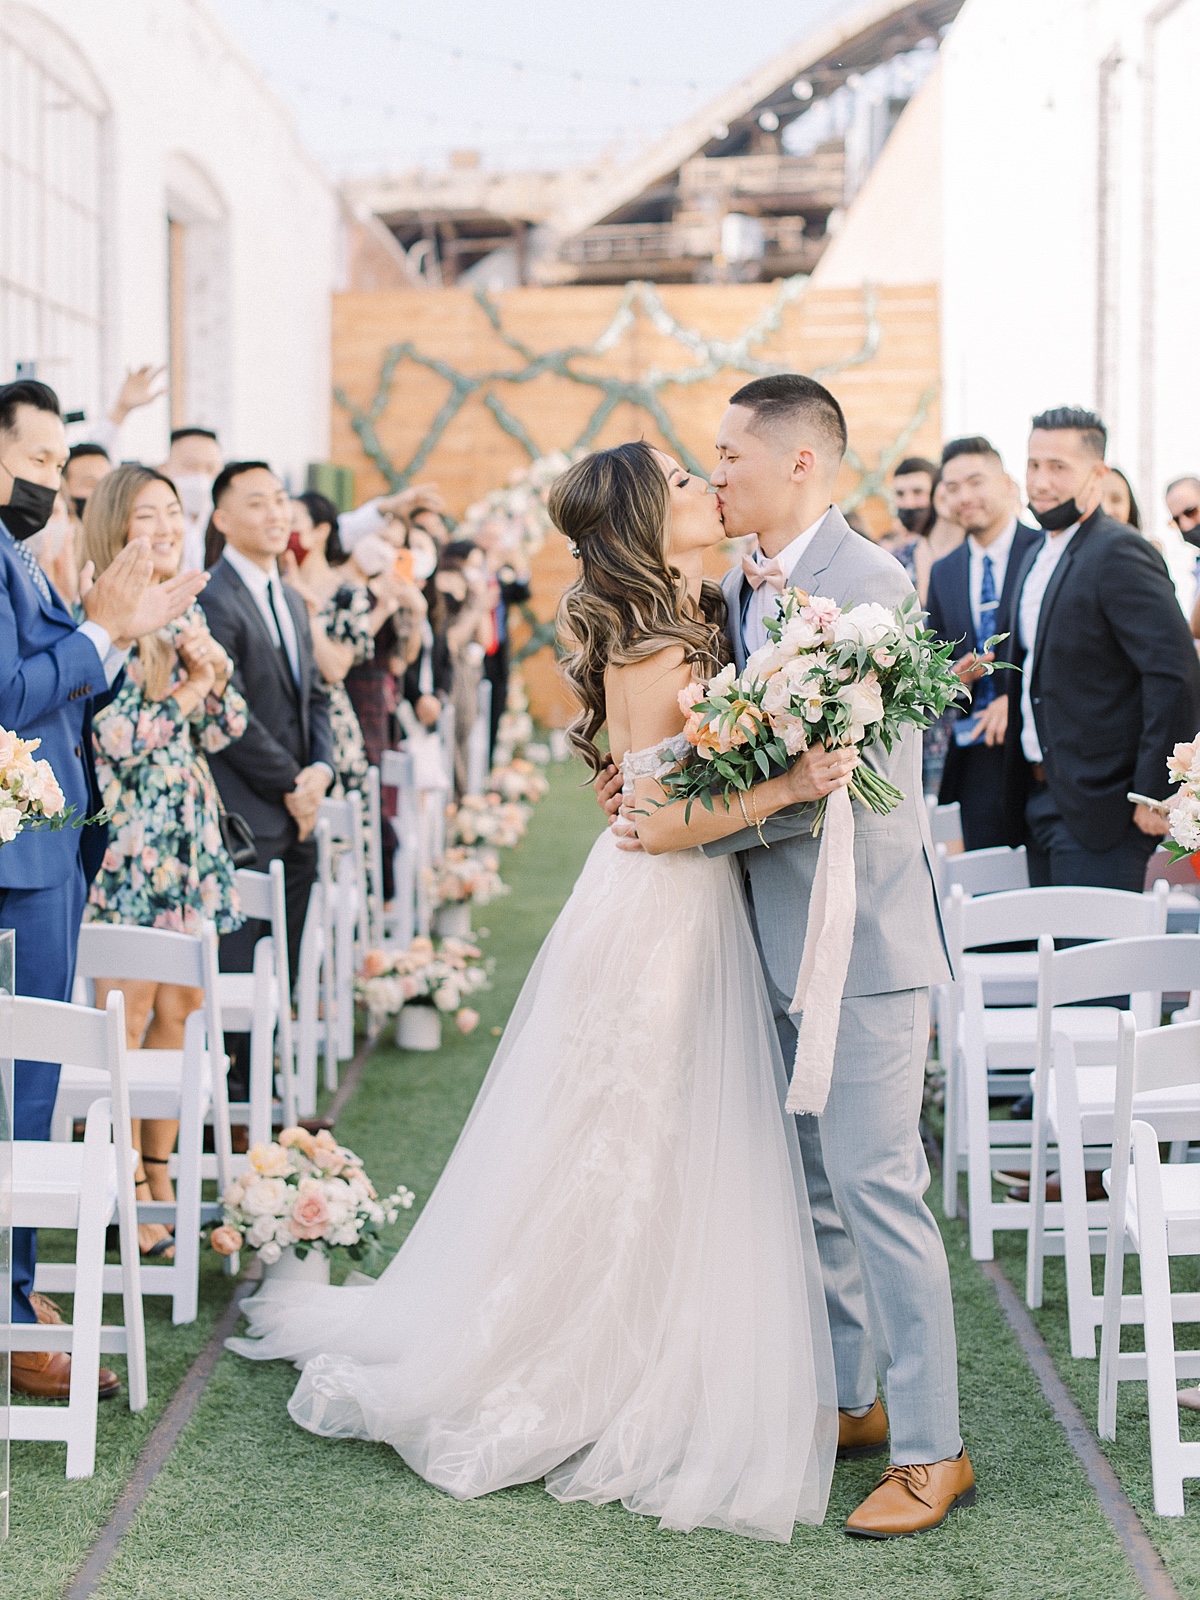 A Wedding and Some Whimsy in Downtown L.A.